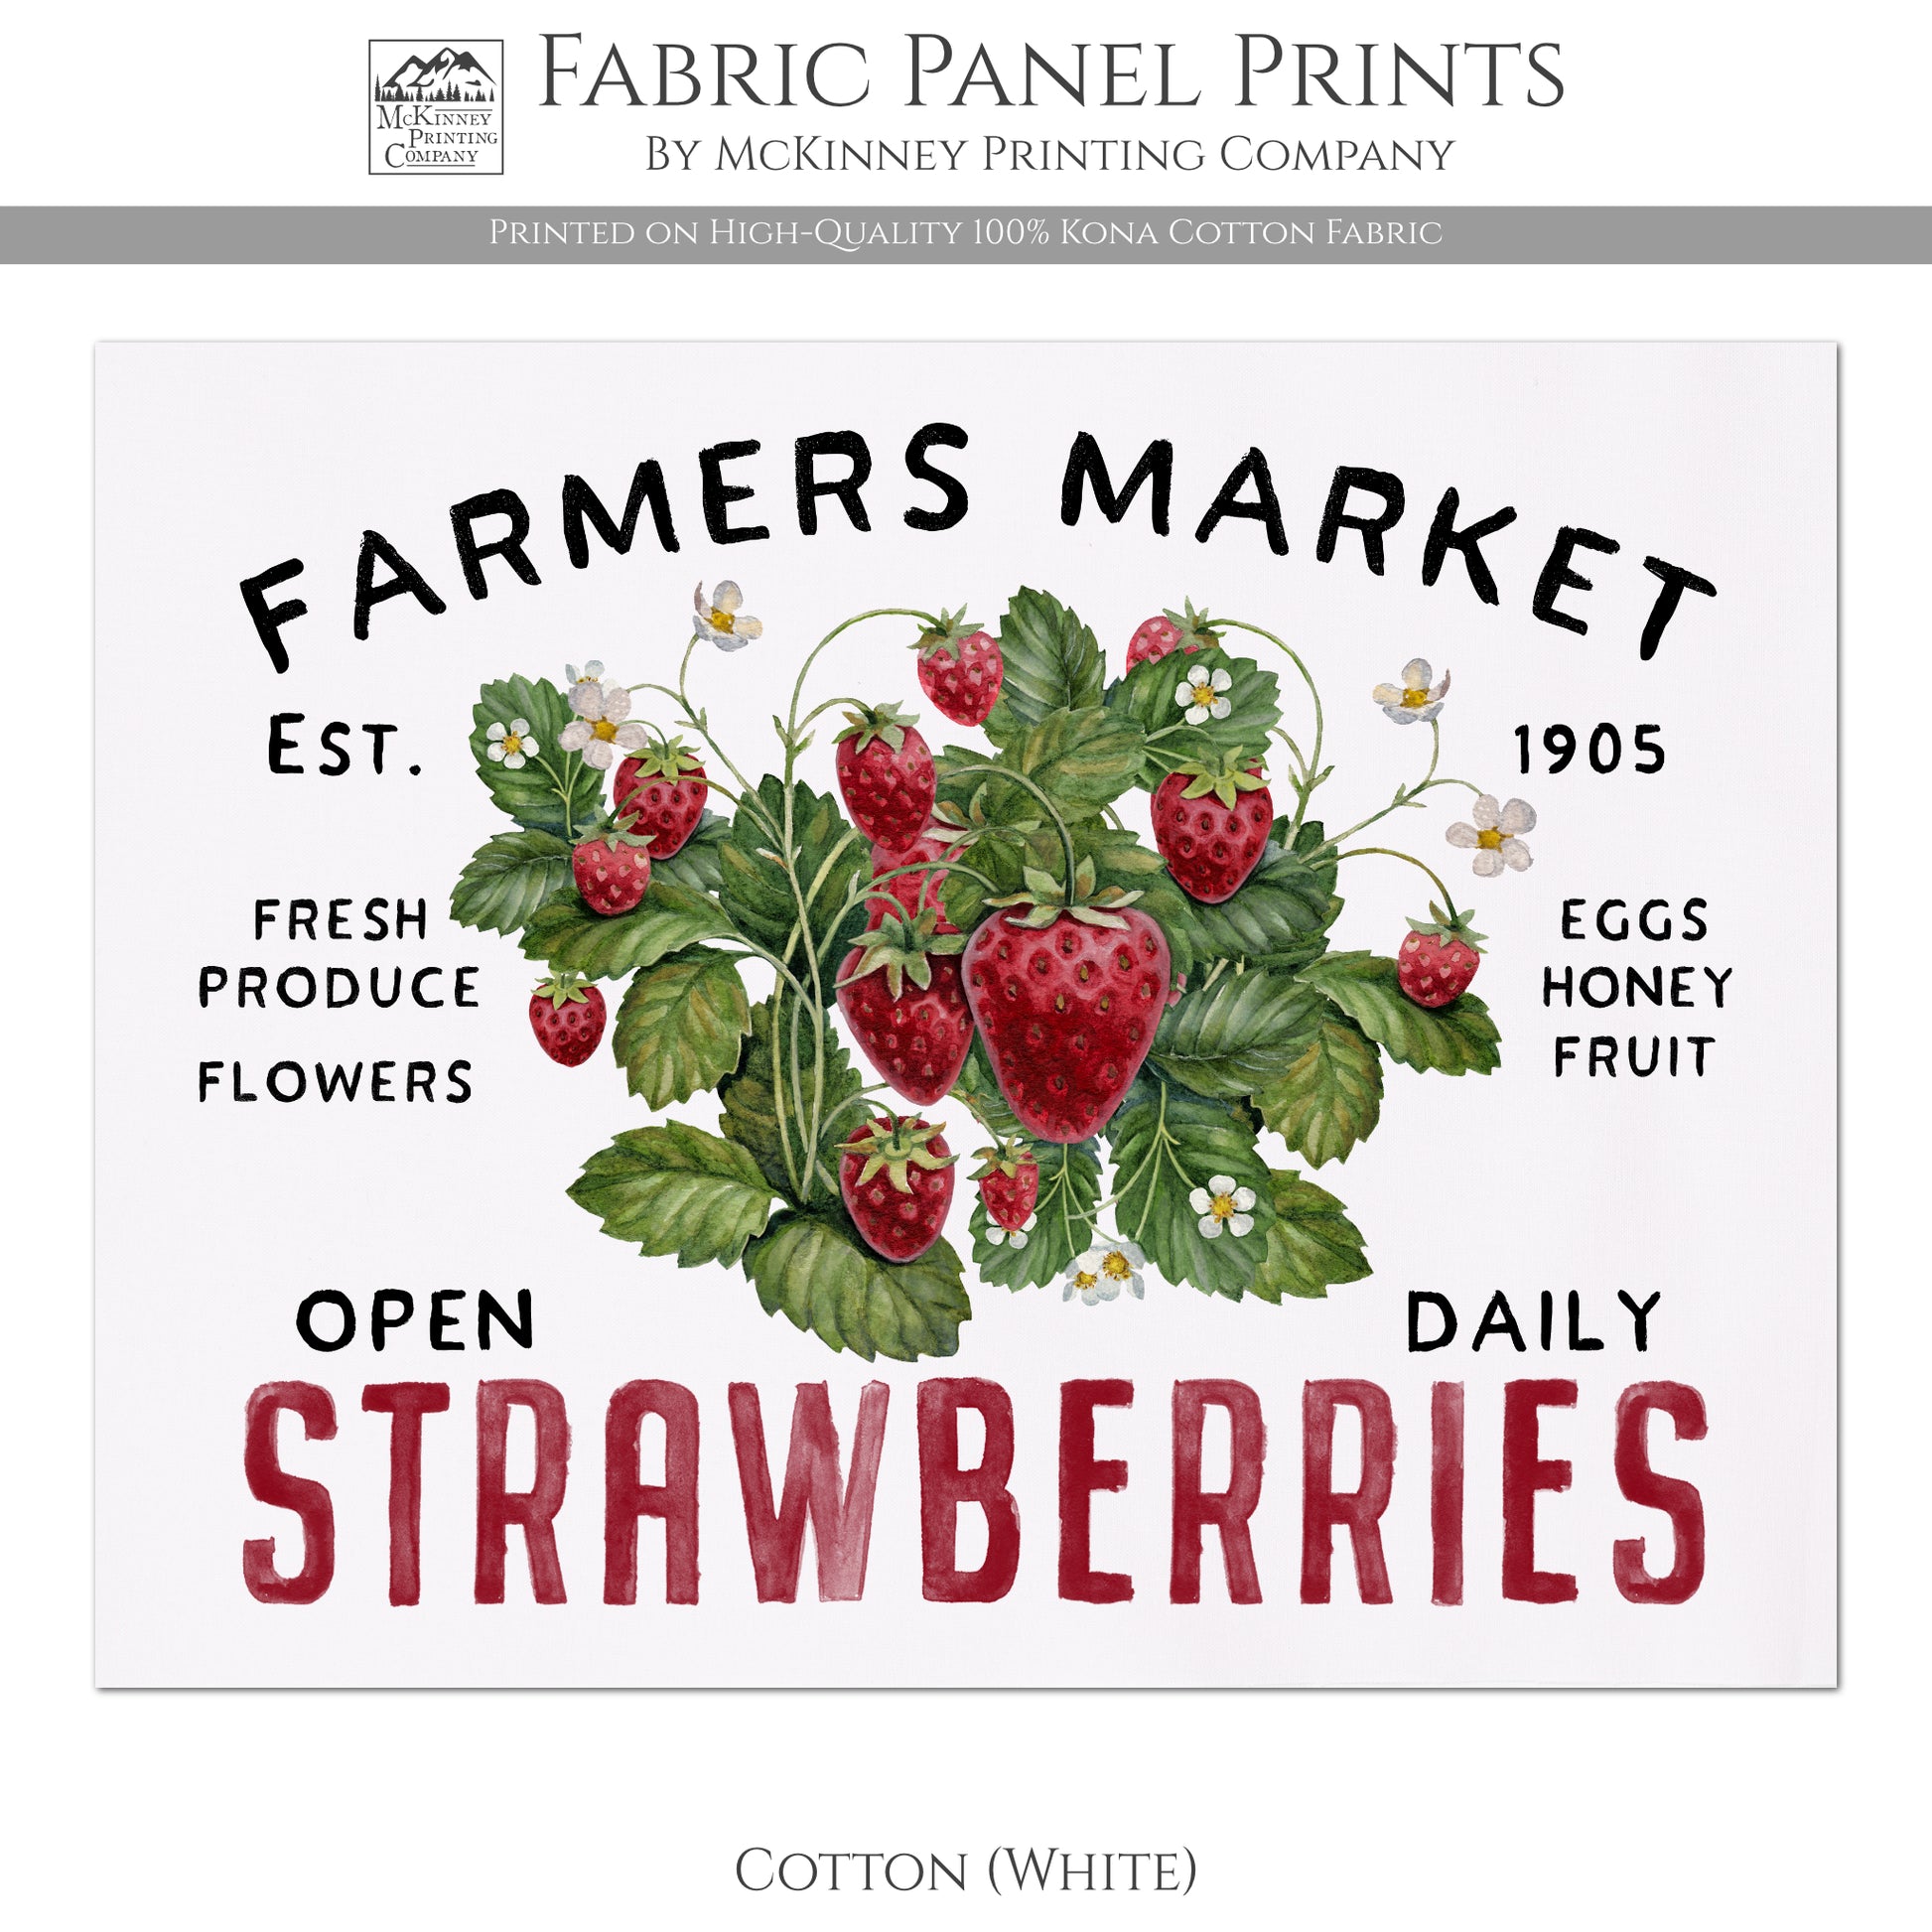 Strawberry Fabric, Farmers Market, Farmhouse, Blueberry, Quilt Block, Quilting, Sewing Supplies, Materials - Cotton, White